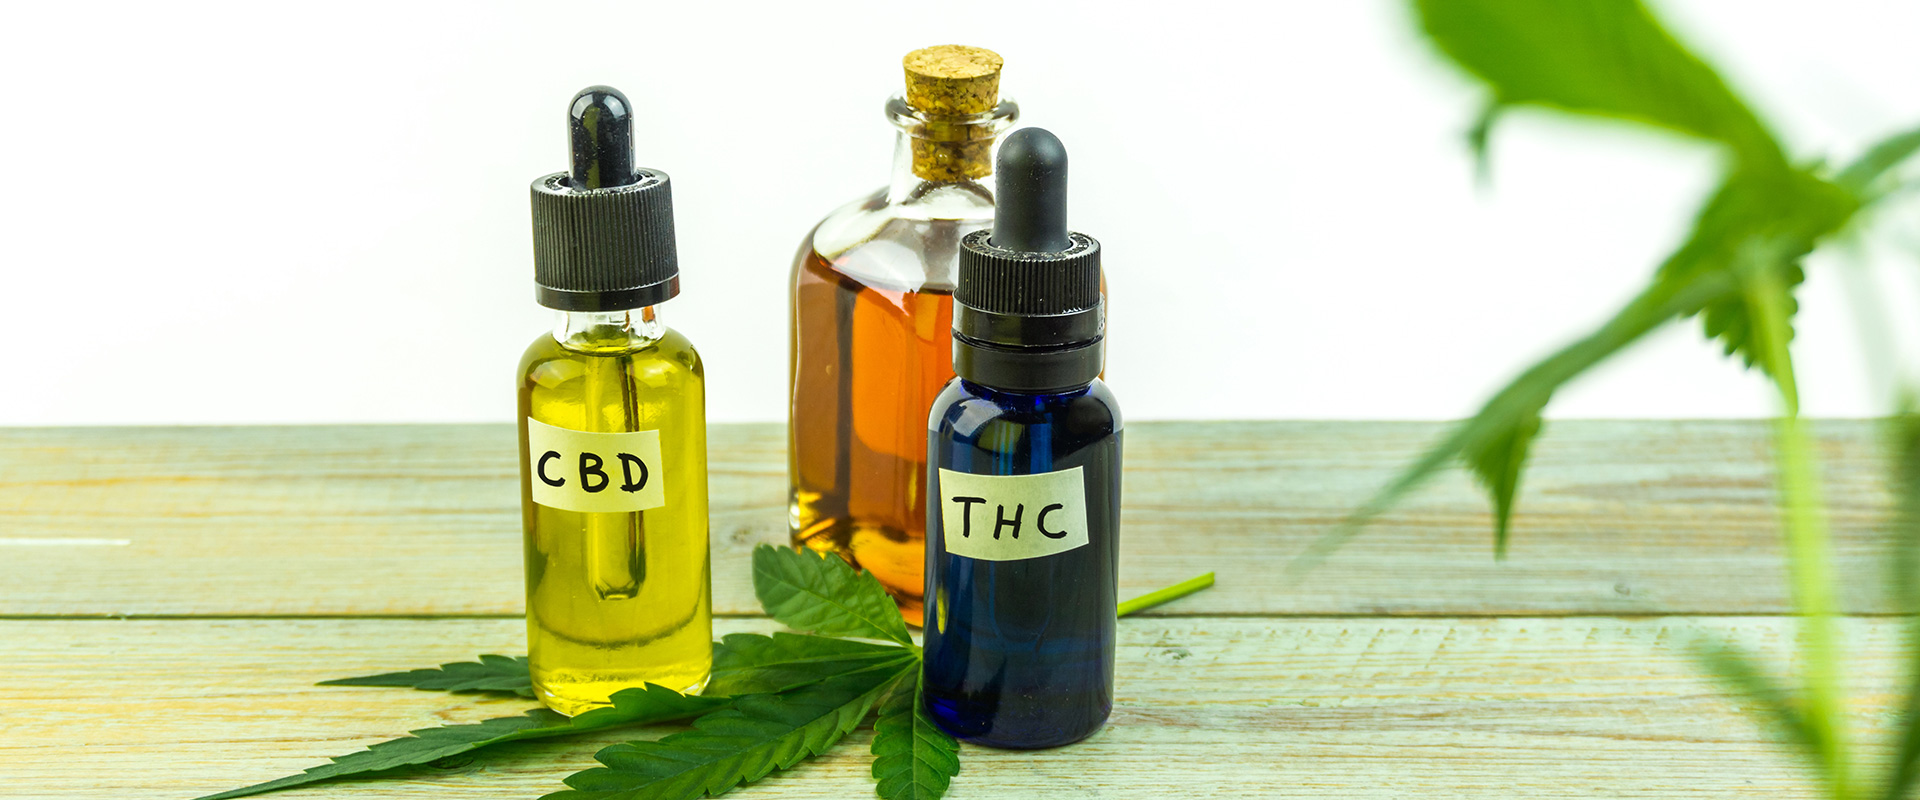 learn-What-is-the-Difference-Between-CBD-and-THC2